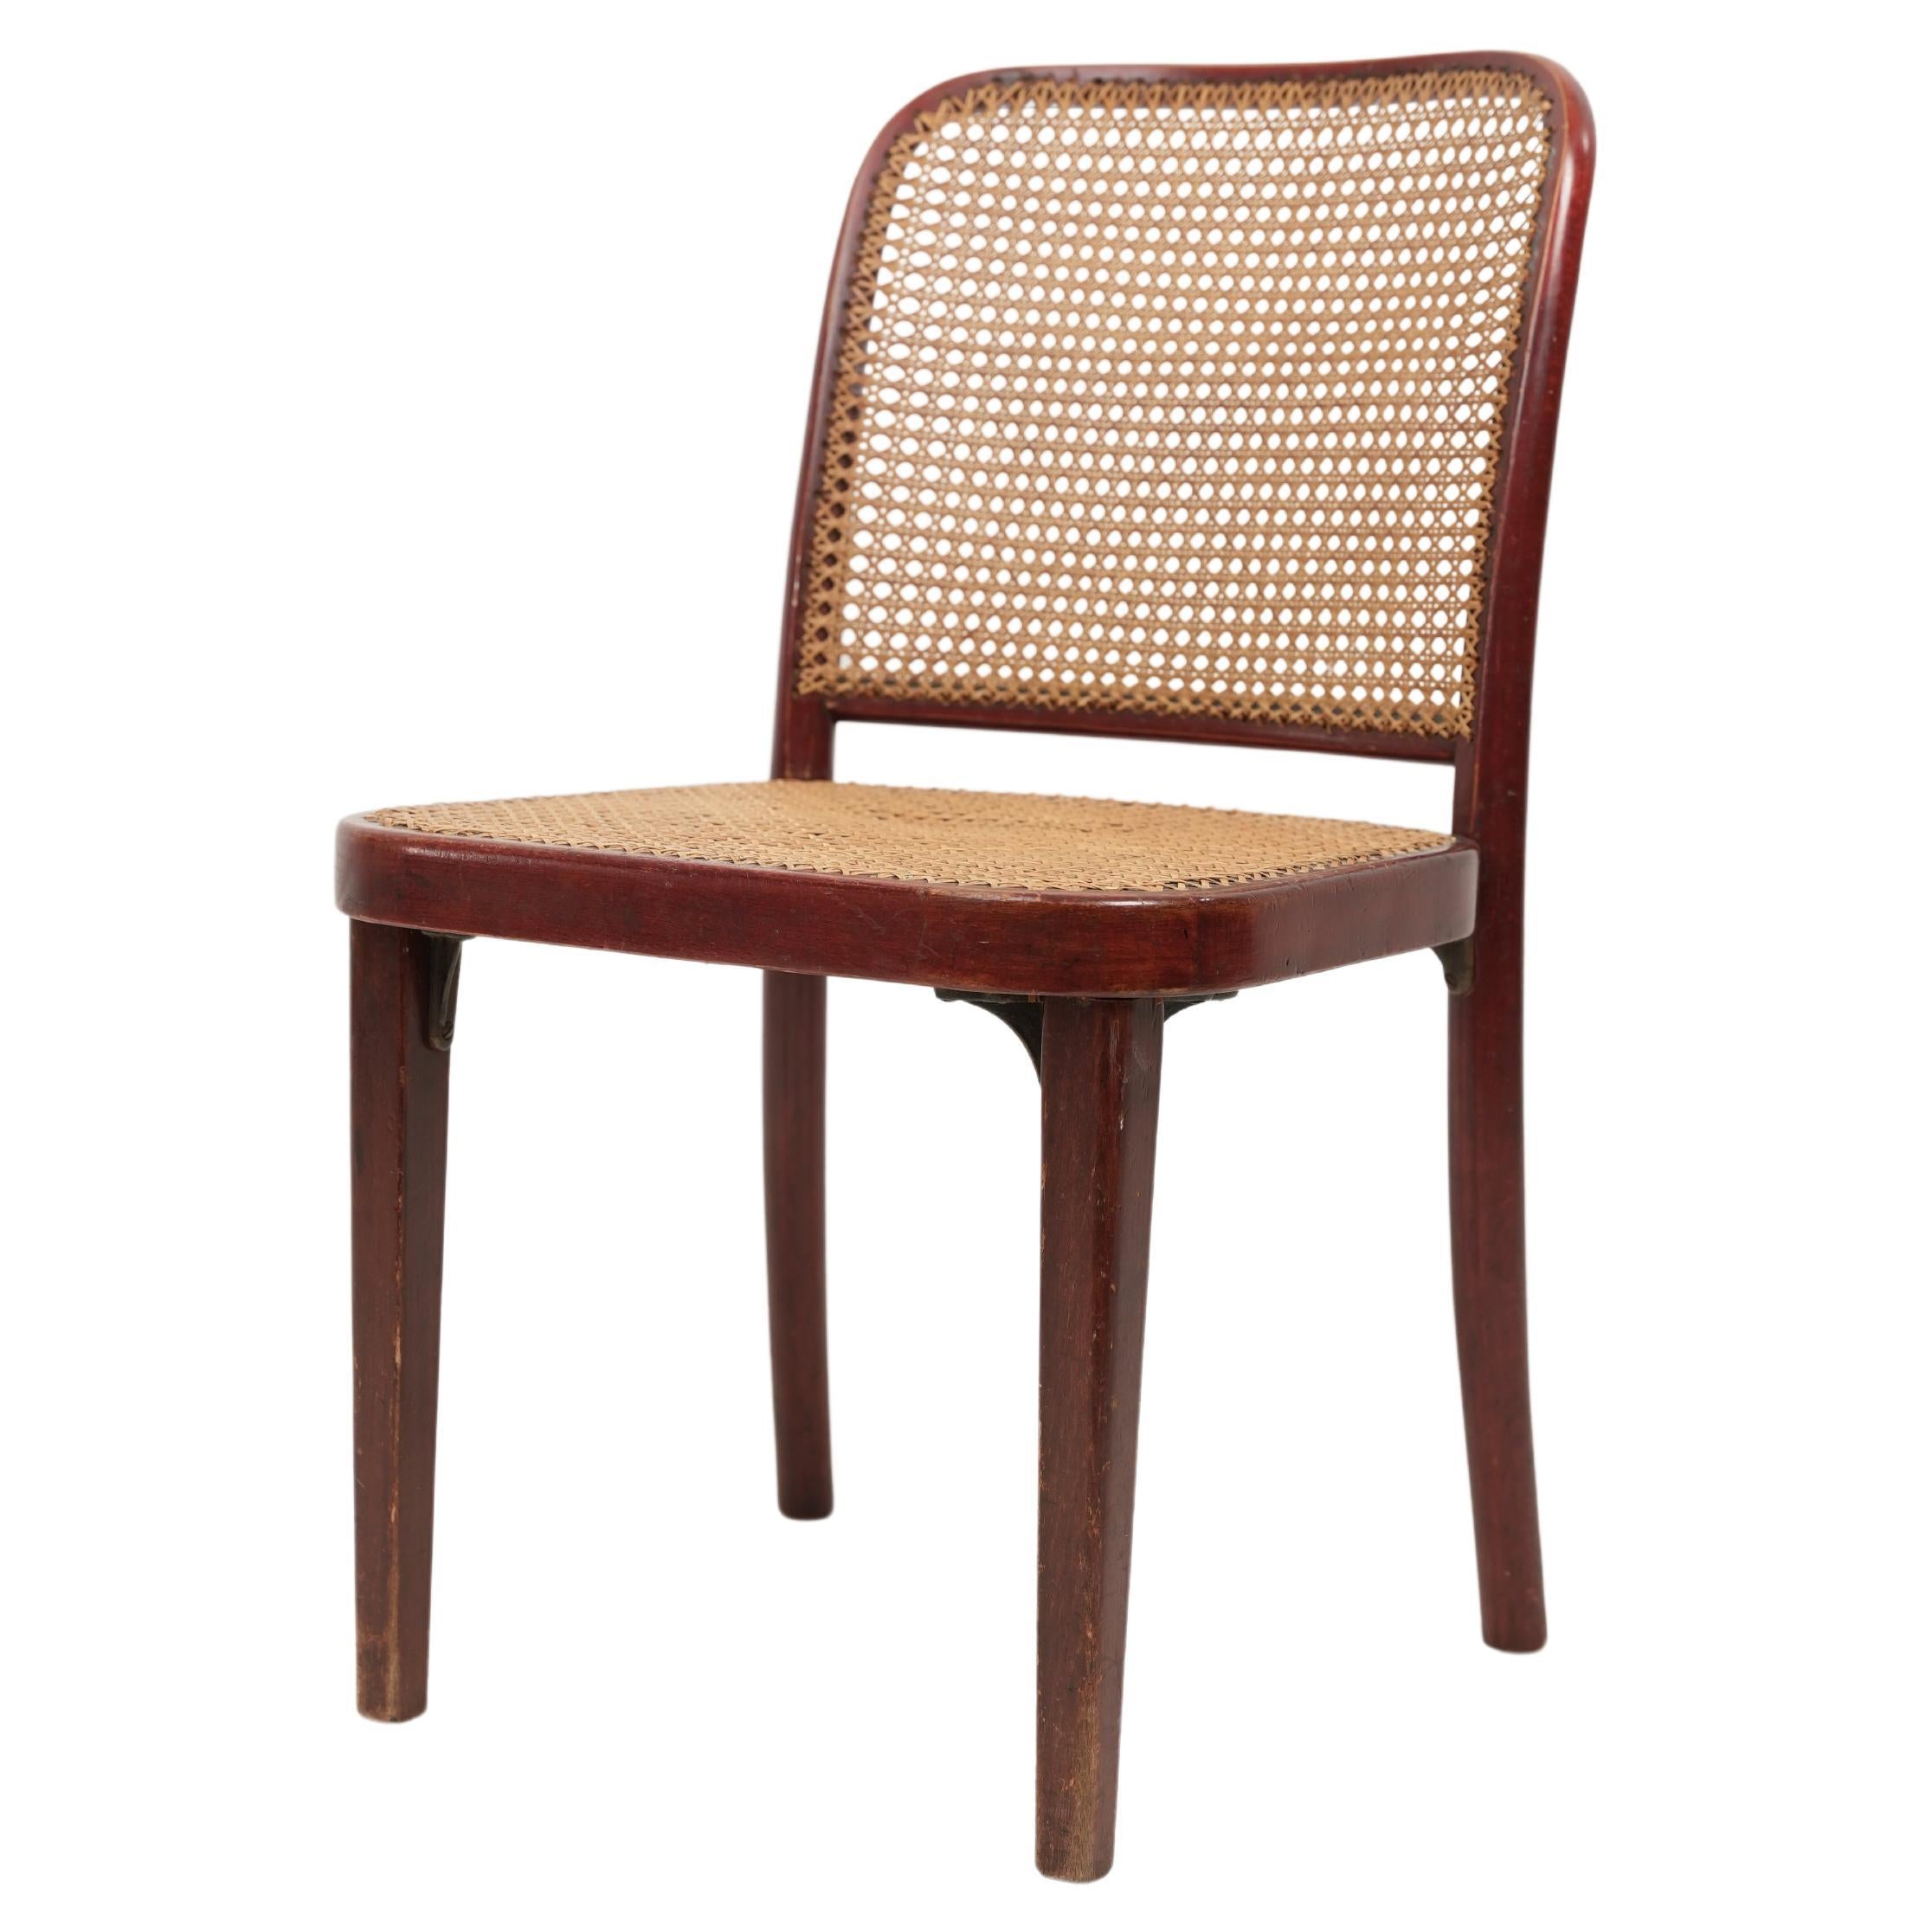 A 811 Chair By Josef Hoffmann or Josef Frank for Thonet 1920s